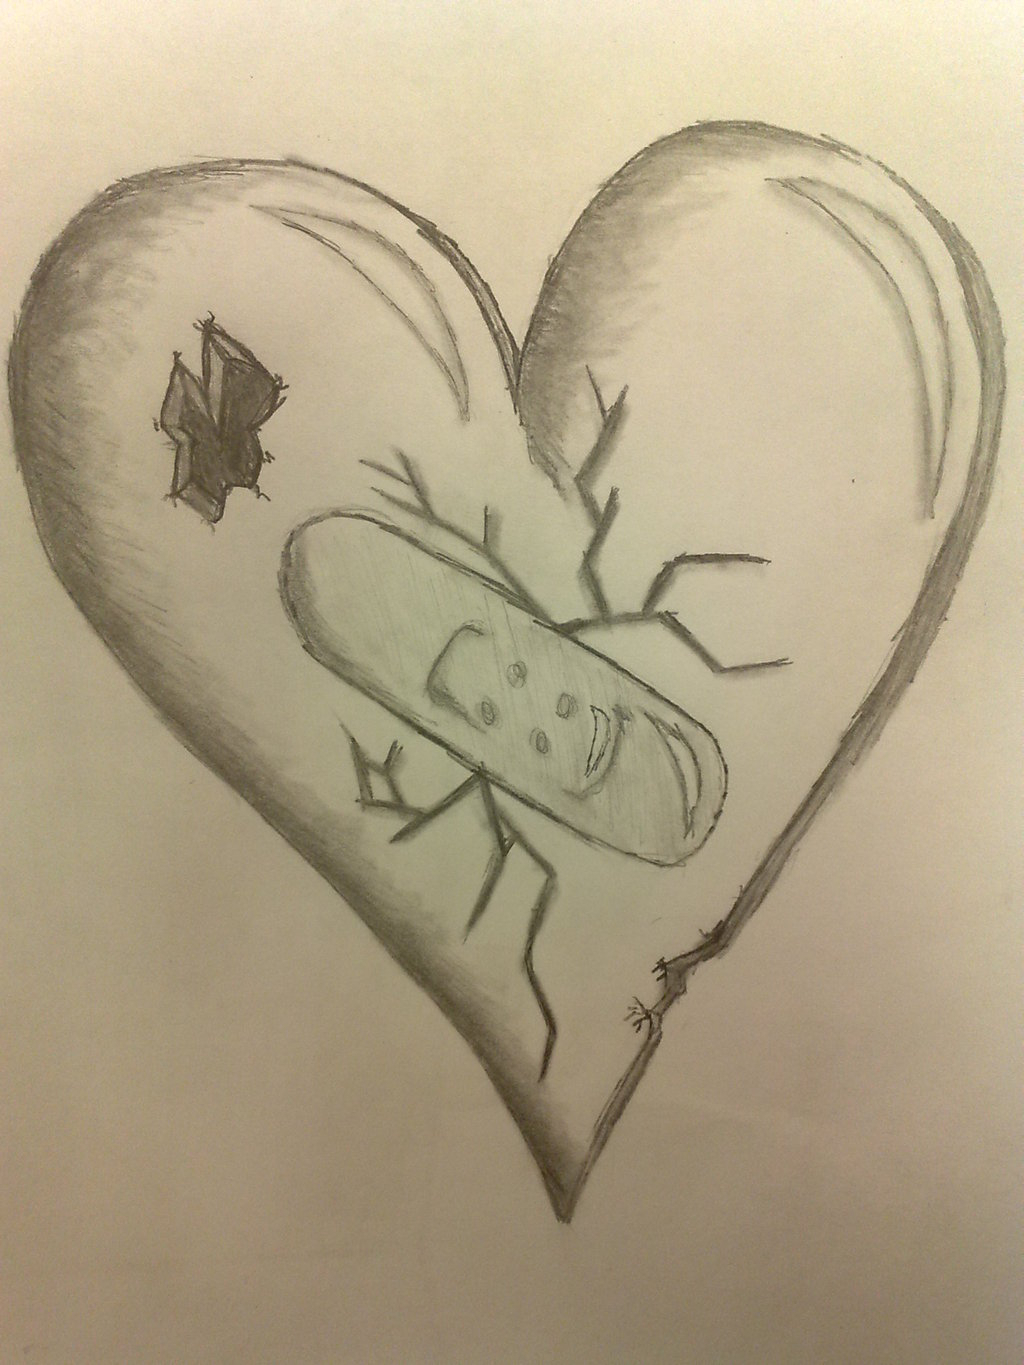 View Broken Heart Drawings Background – Special Image